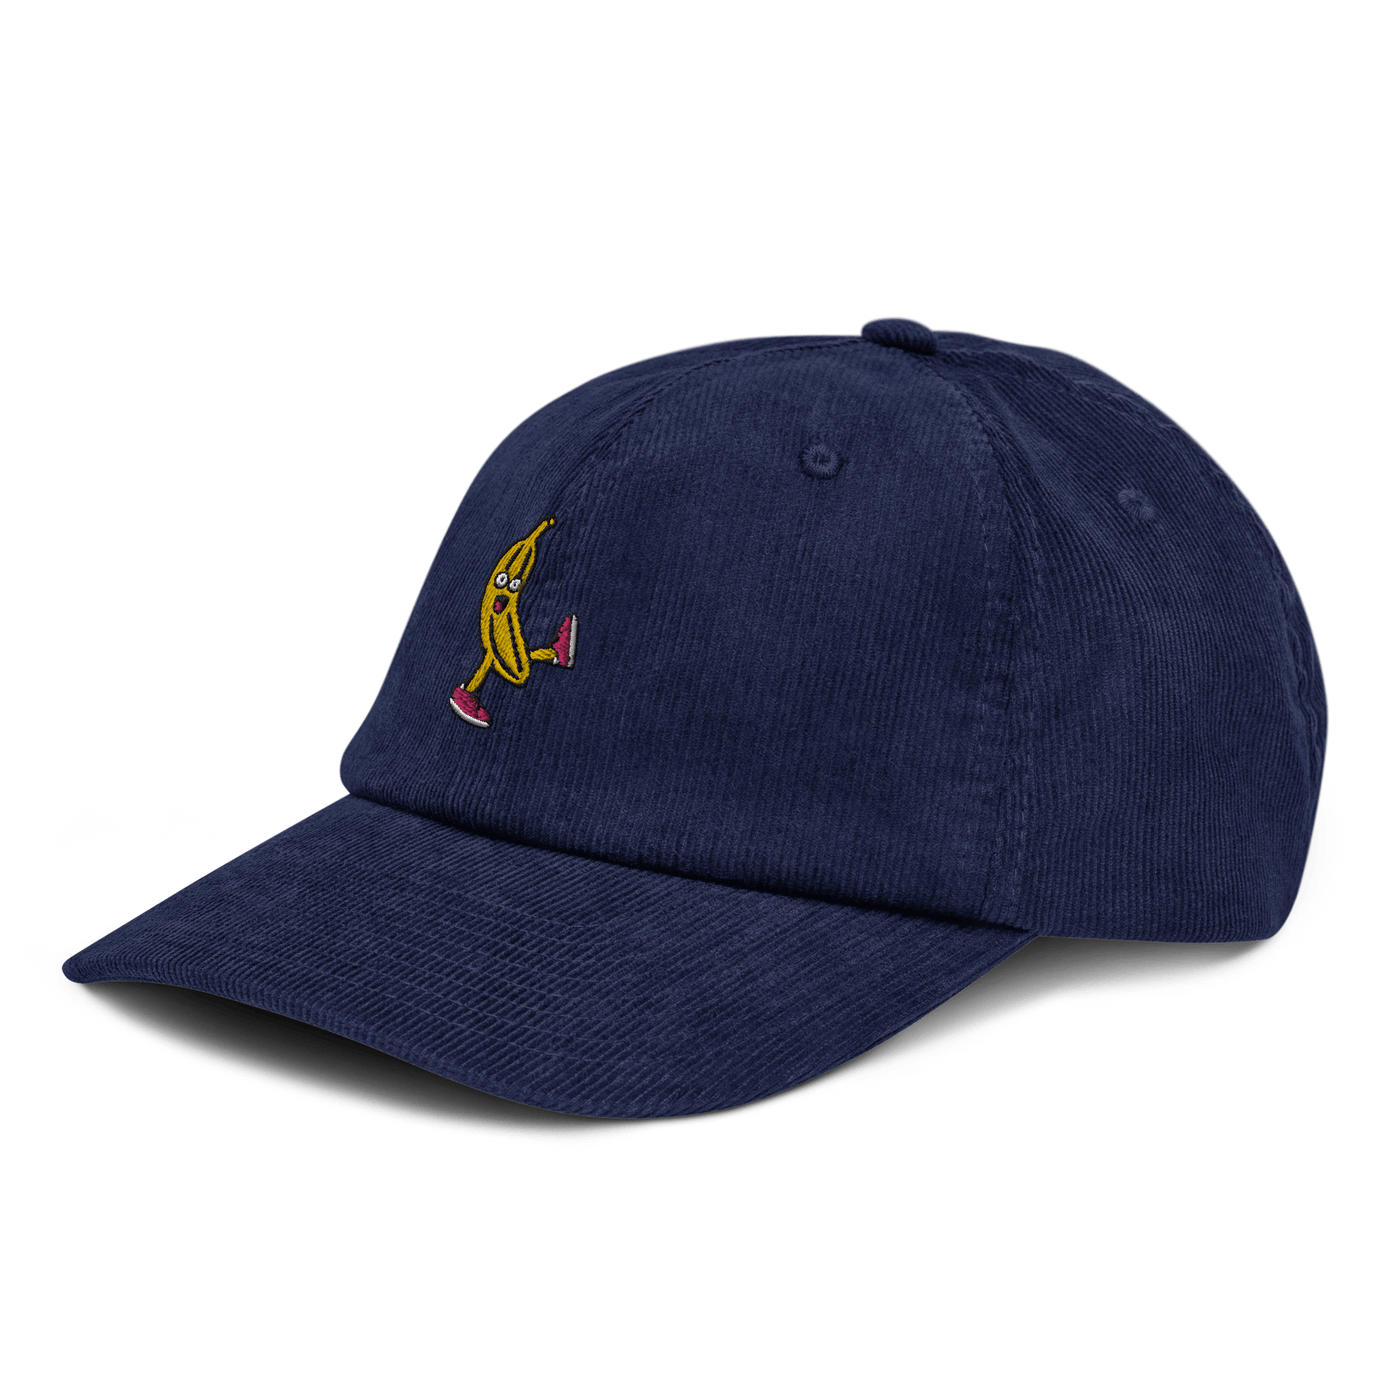 Drunk Banana Corduroy hat - Oxford Navy - - Just Another Cap Store